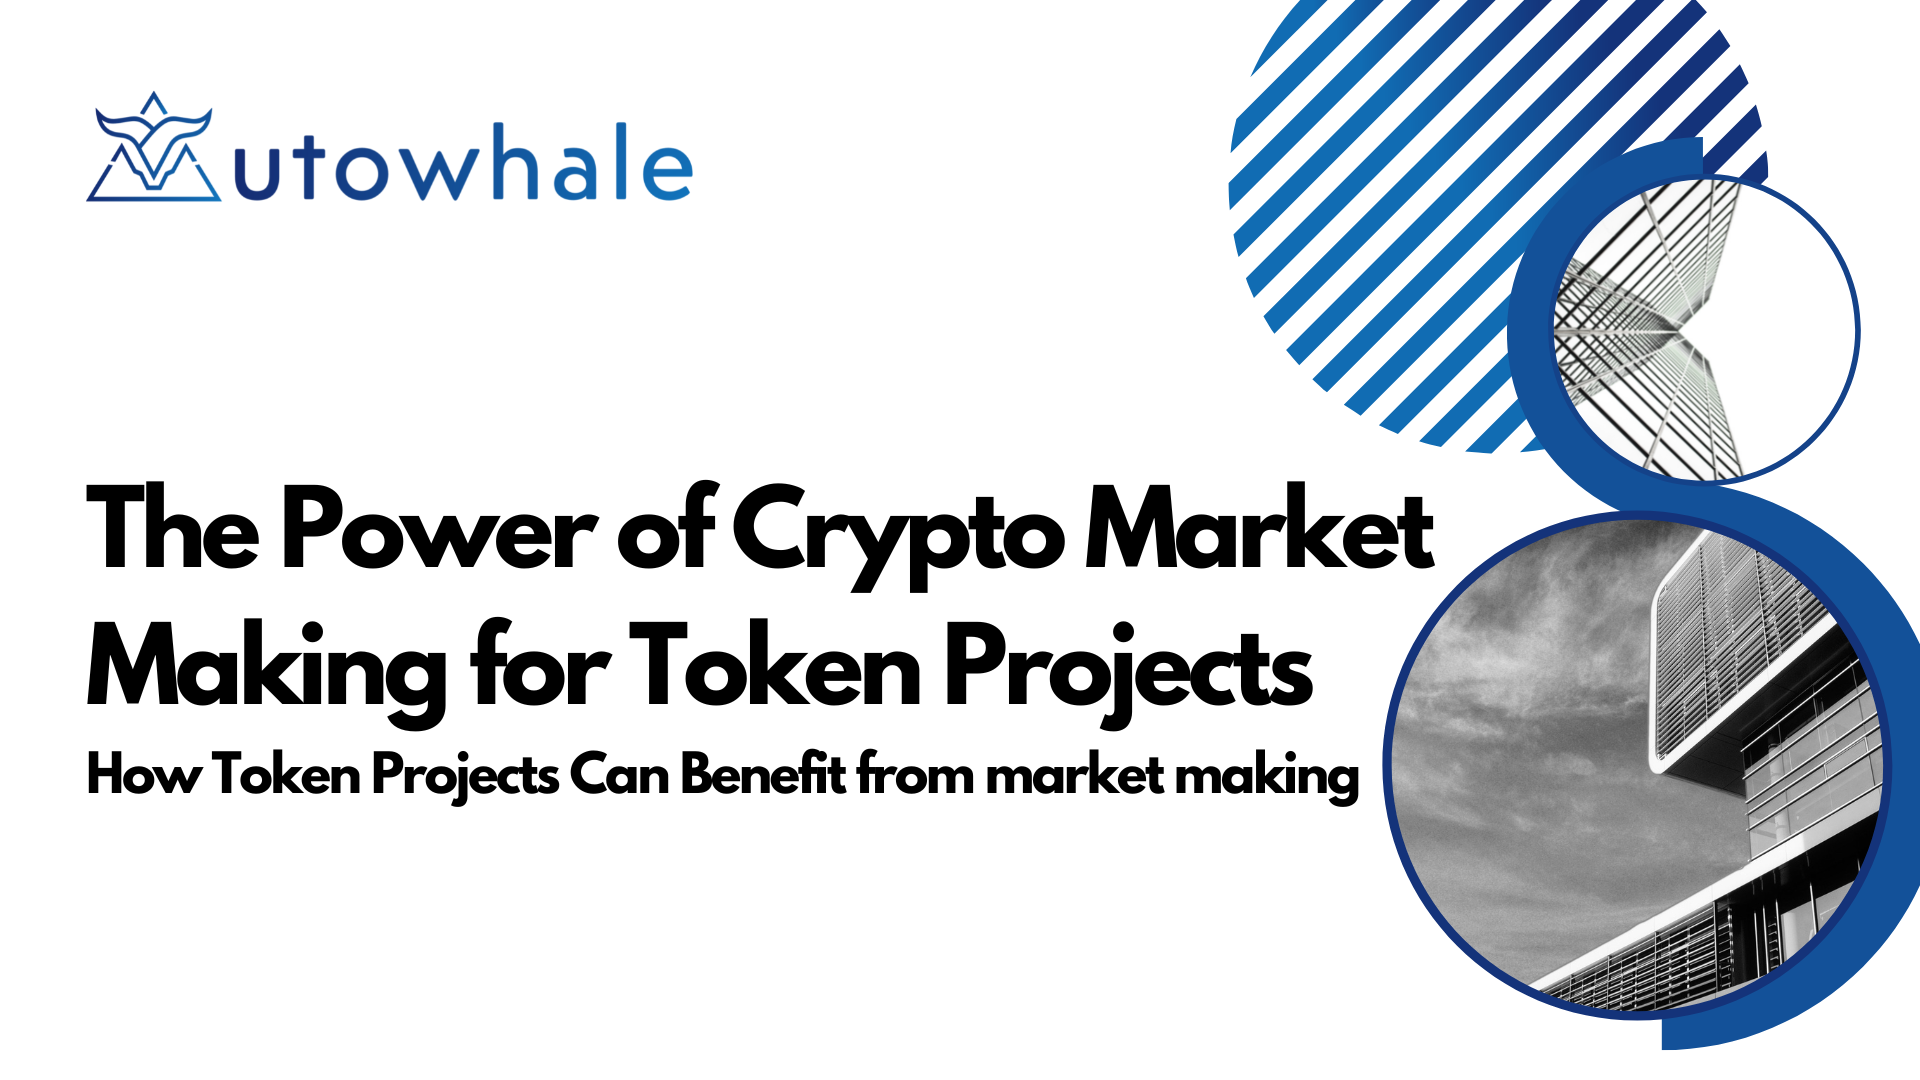 Crypto market making for token projects